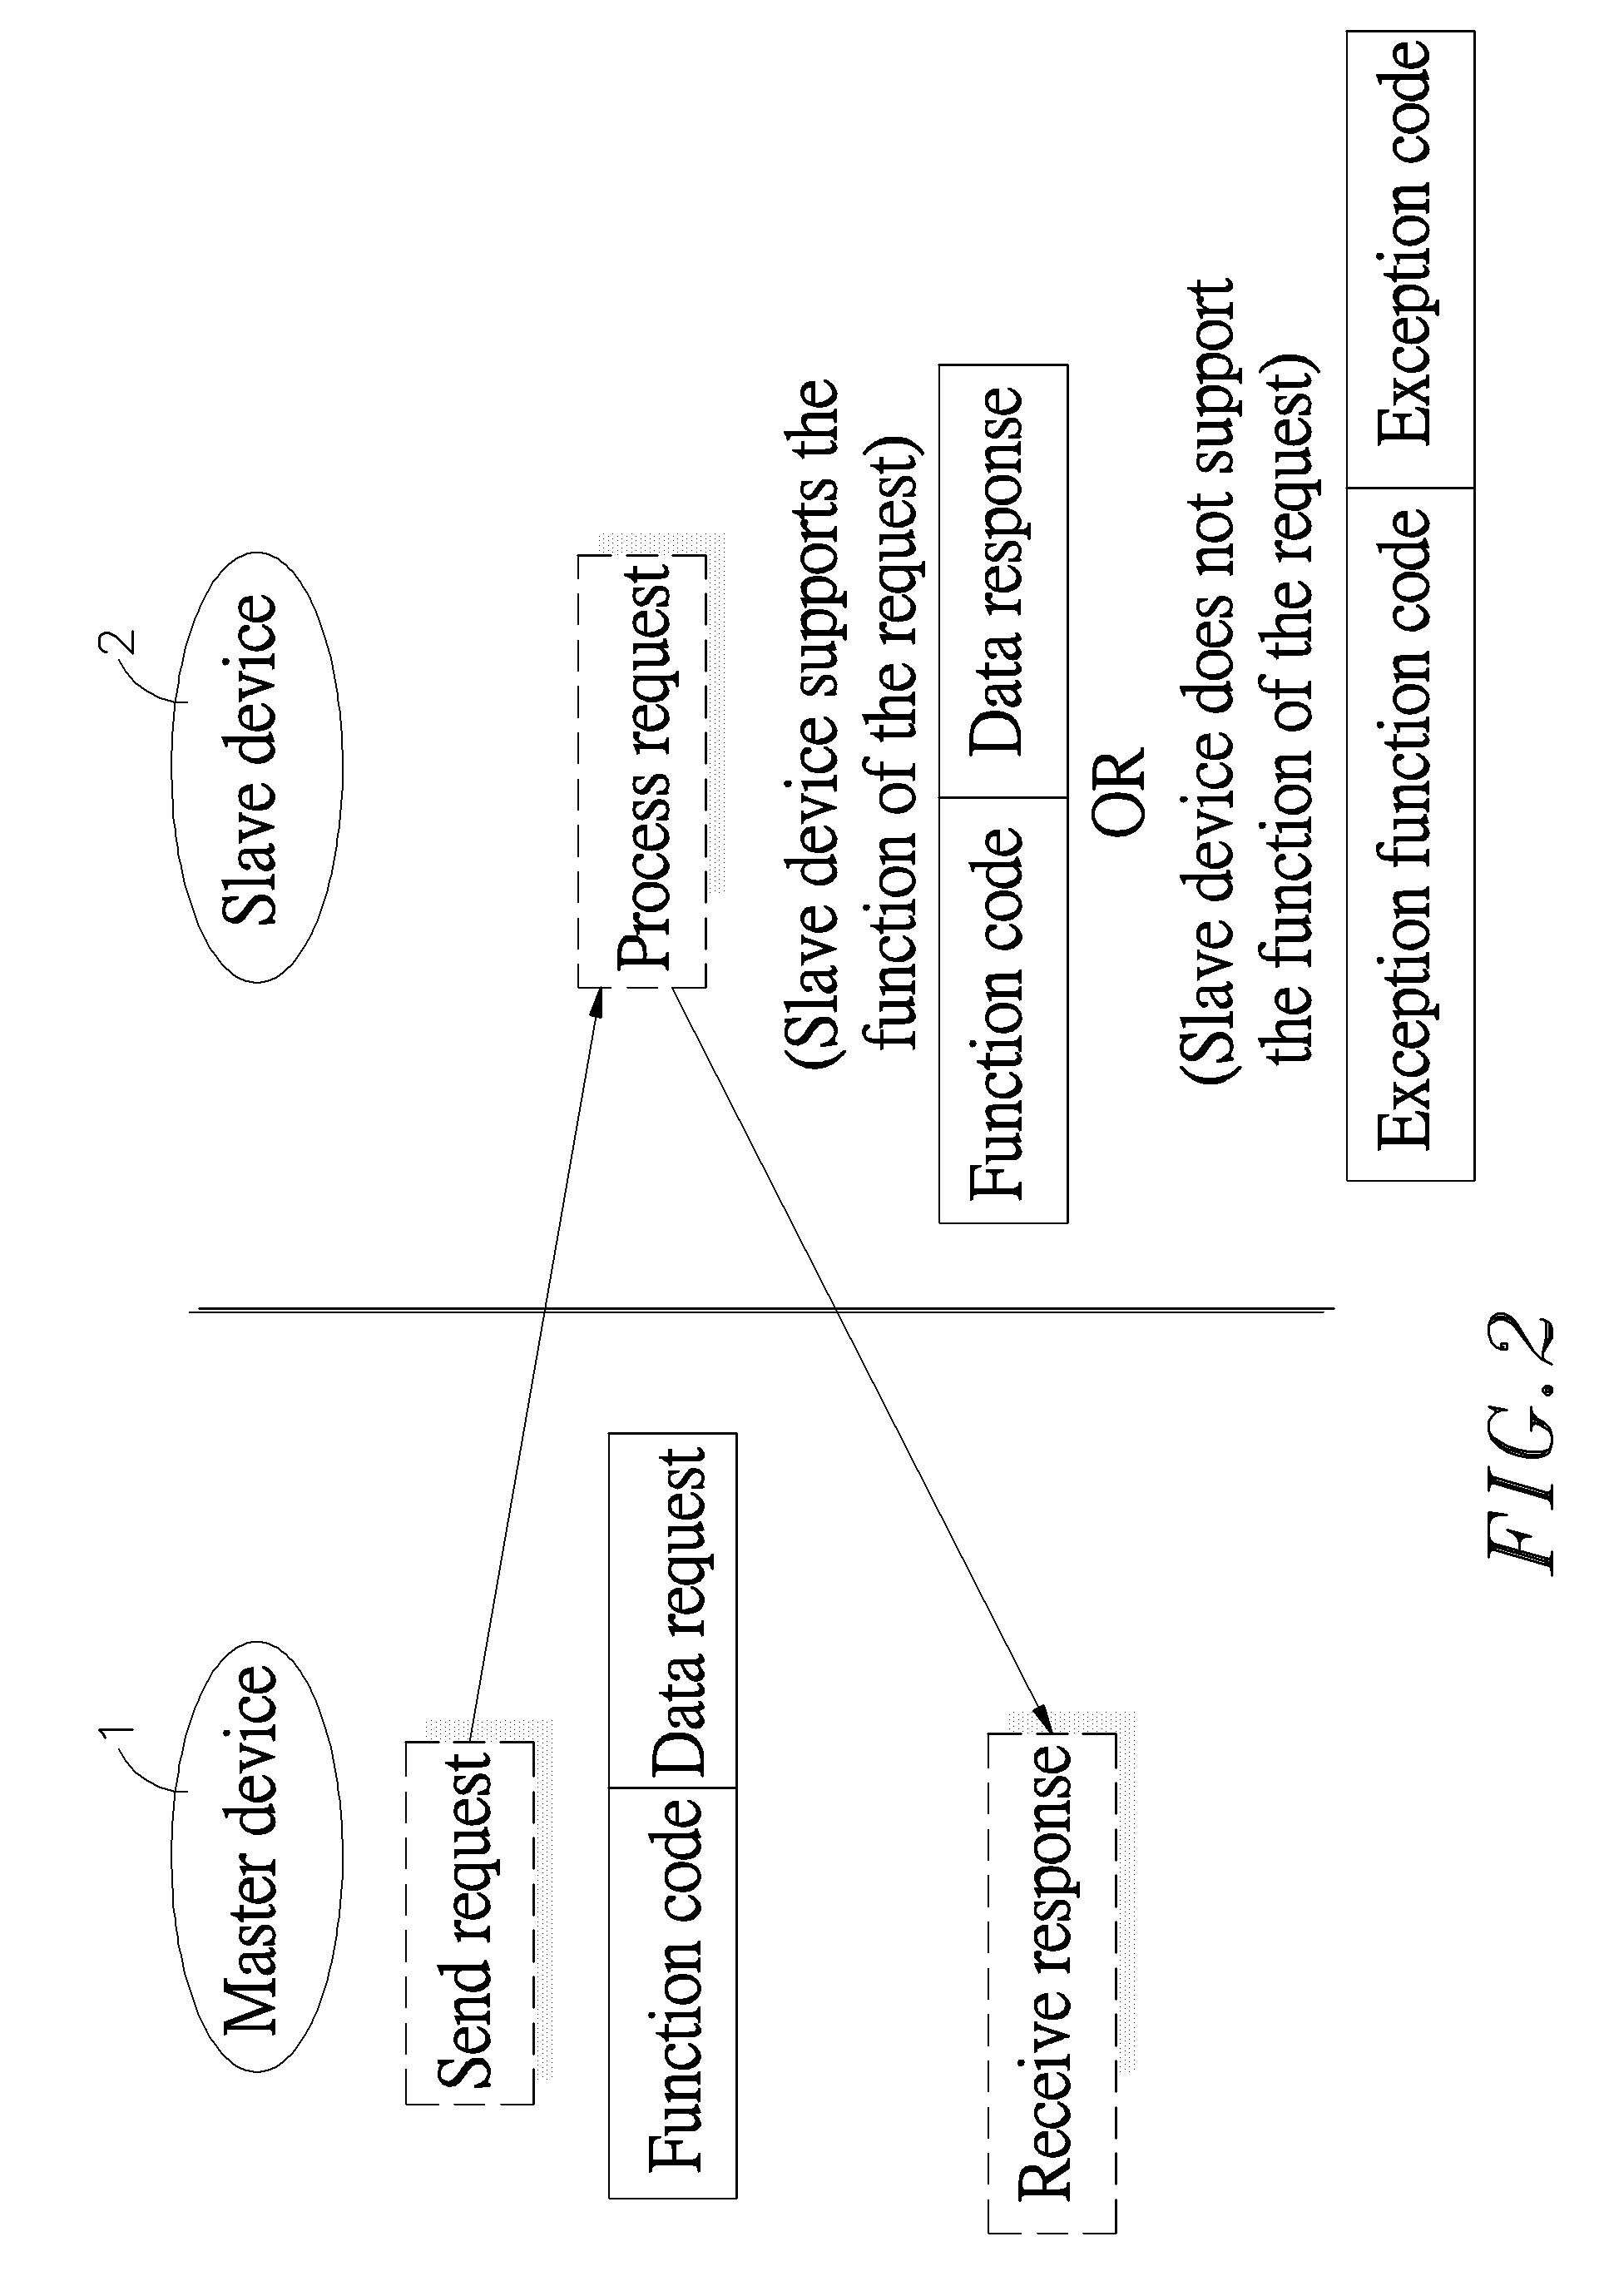 Method of detecting master/slave response time-out under continuous packet format communications protocol